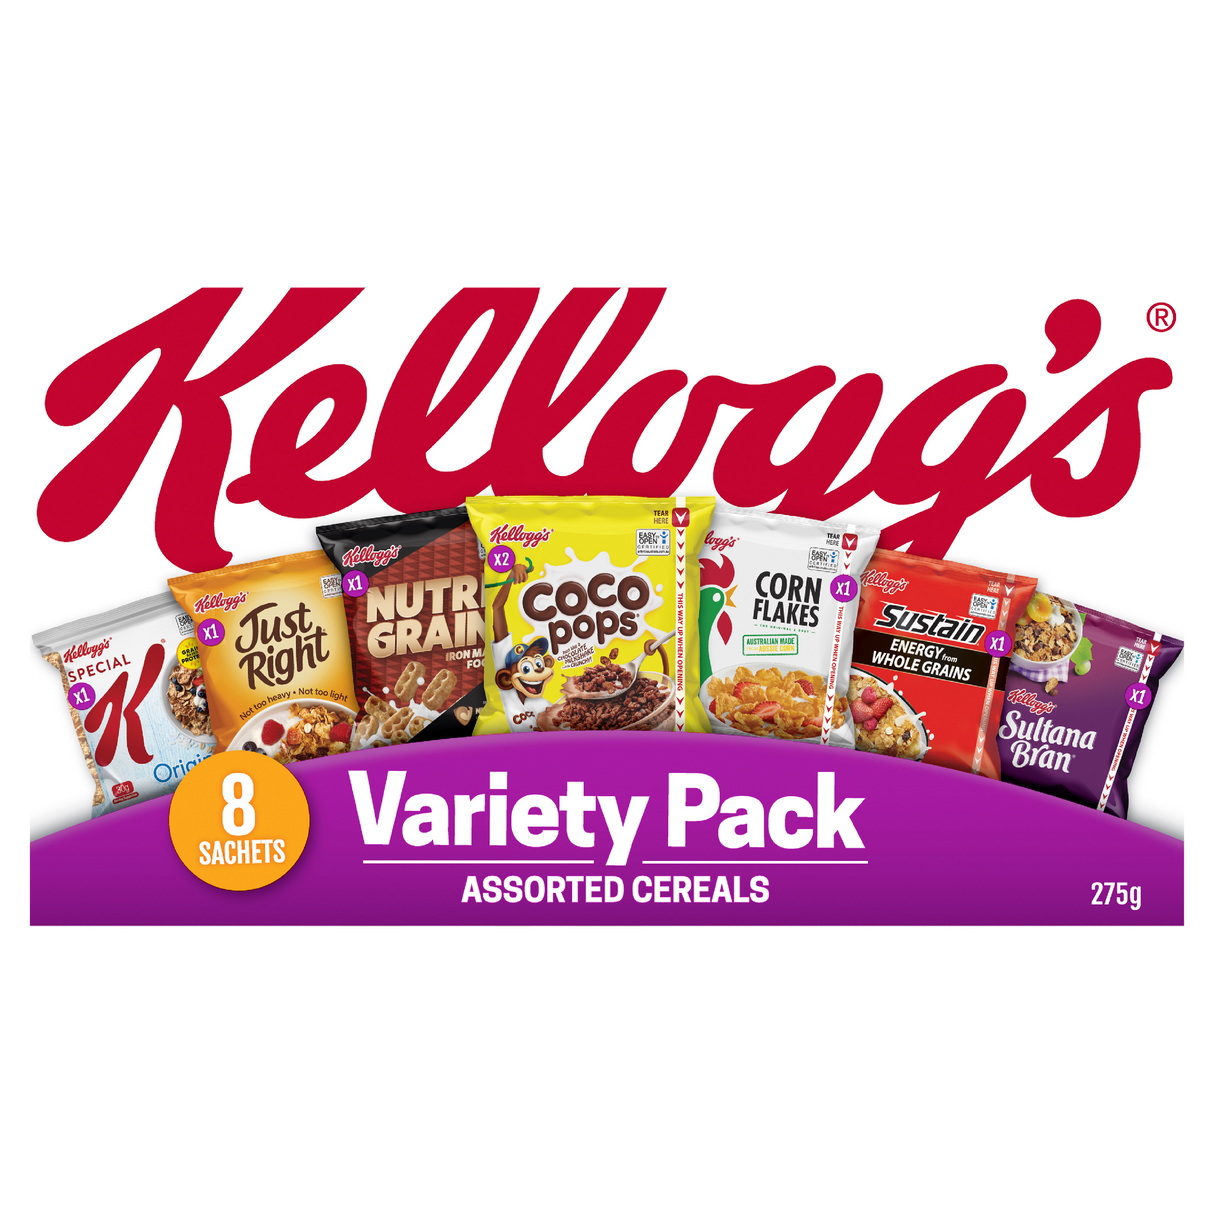 Kellogg's Variety Pack 8 Assorted Breakfast Cereal Sachets 275g